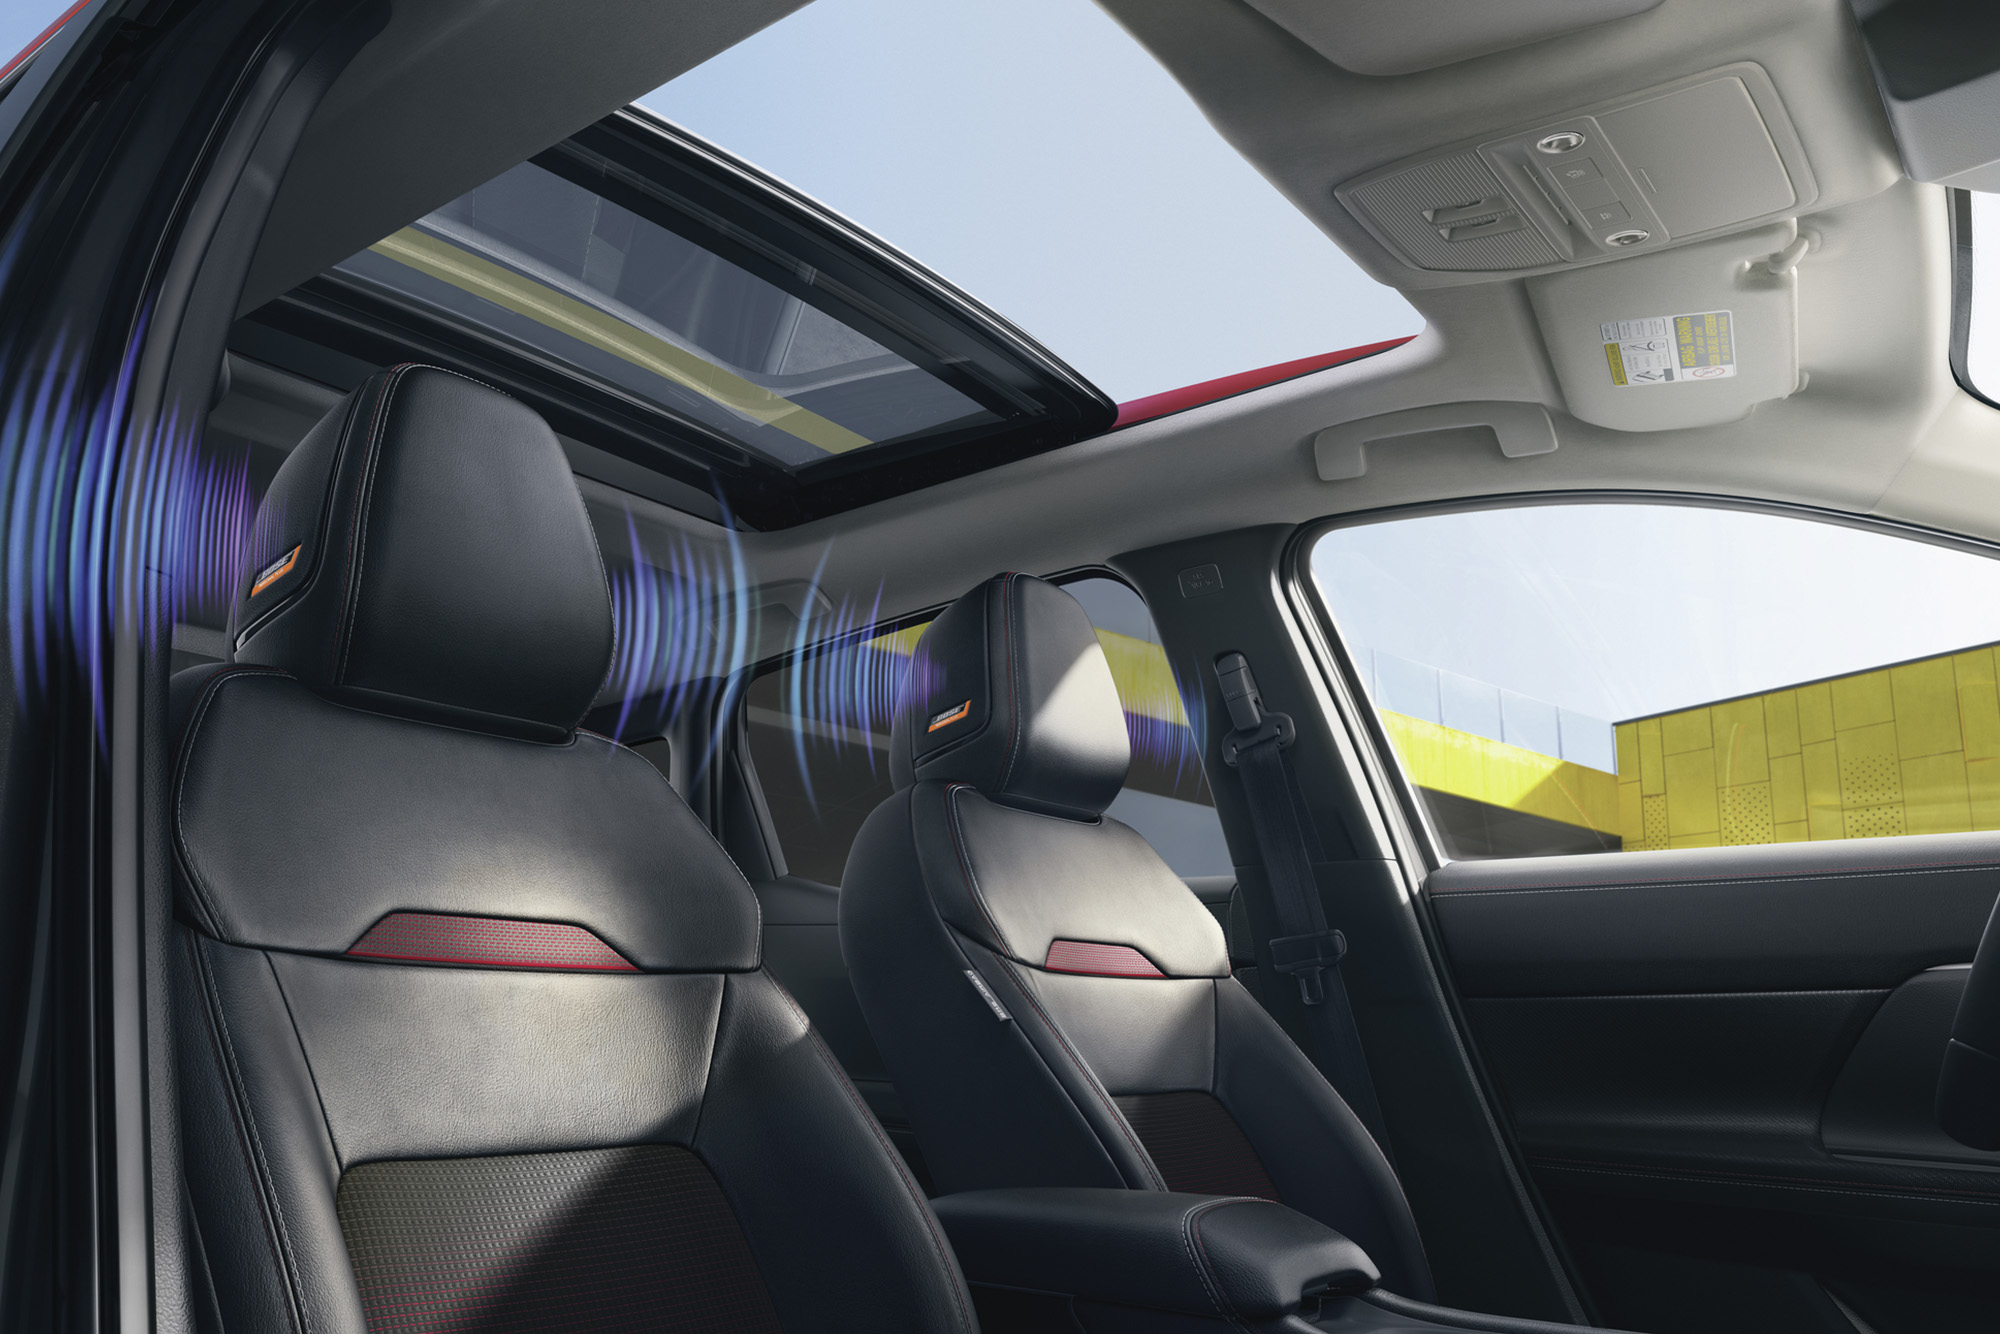 The All-New 2025 Nissan KICKS front seat